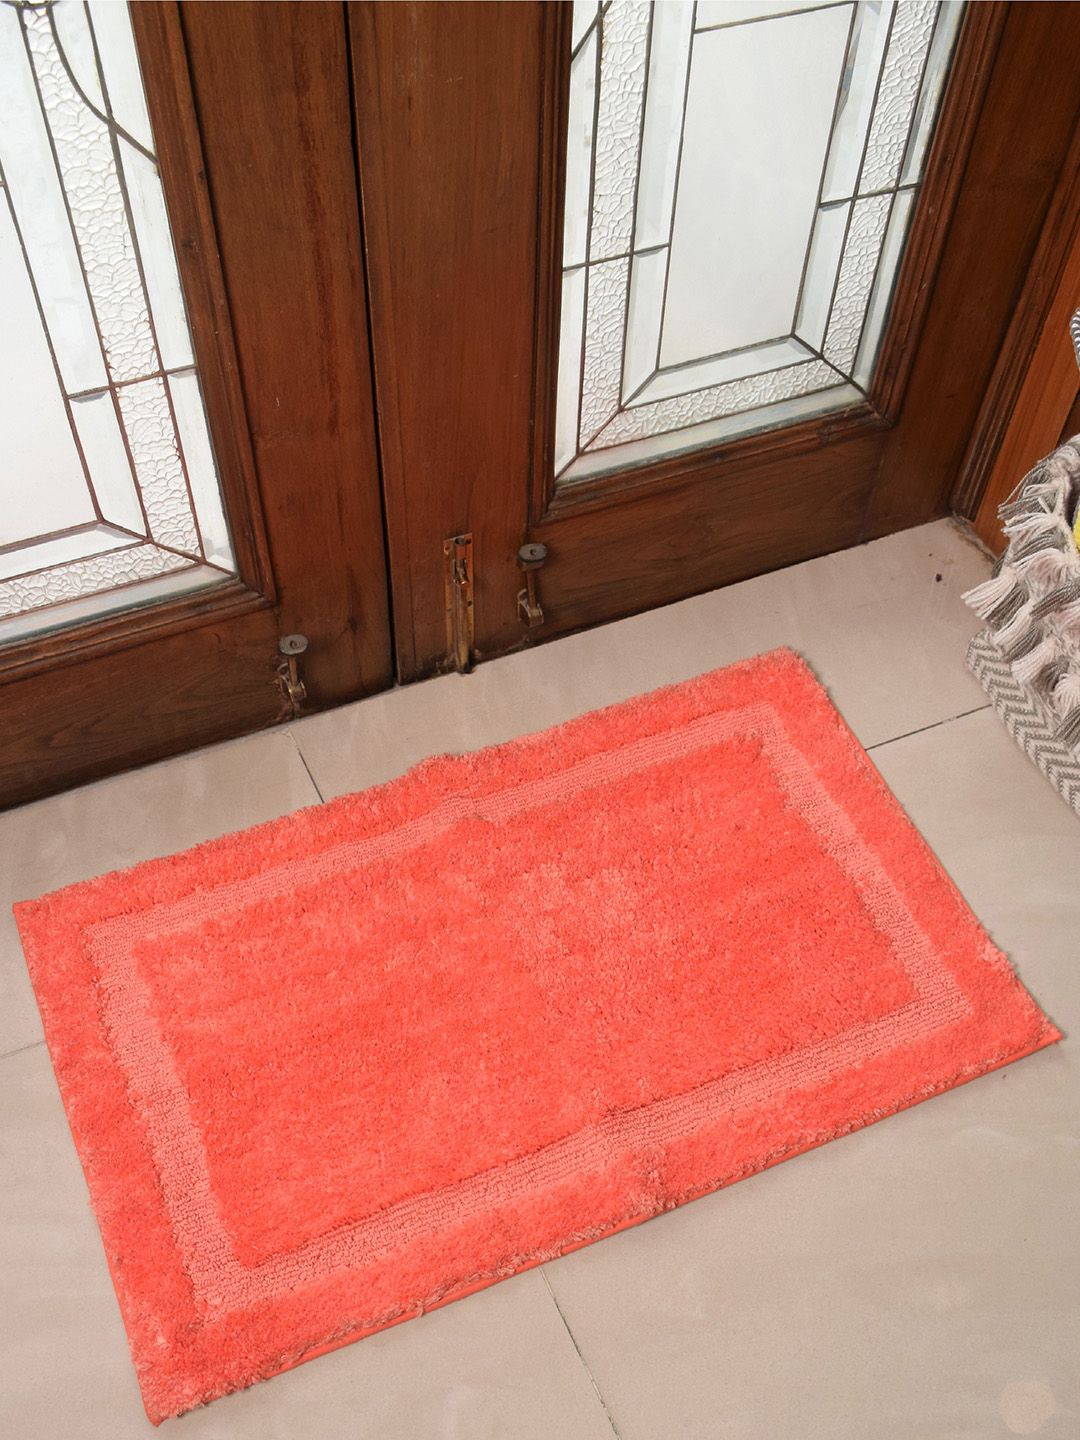 Avira Home Coral Orange Solid 1800GSM Microfiber Chennile Anti Slip Doormat with Rubber Backing Price in India